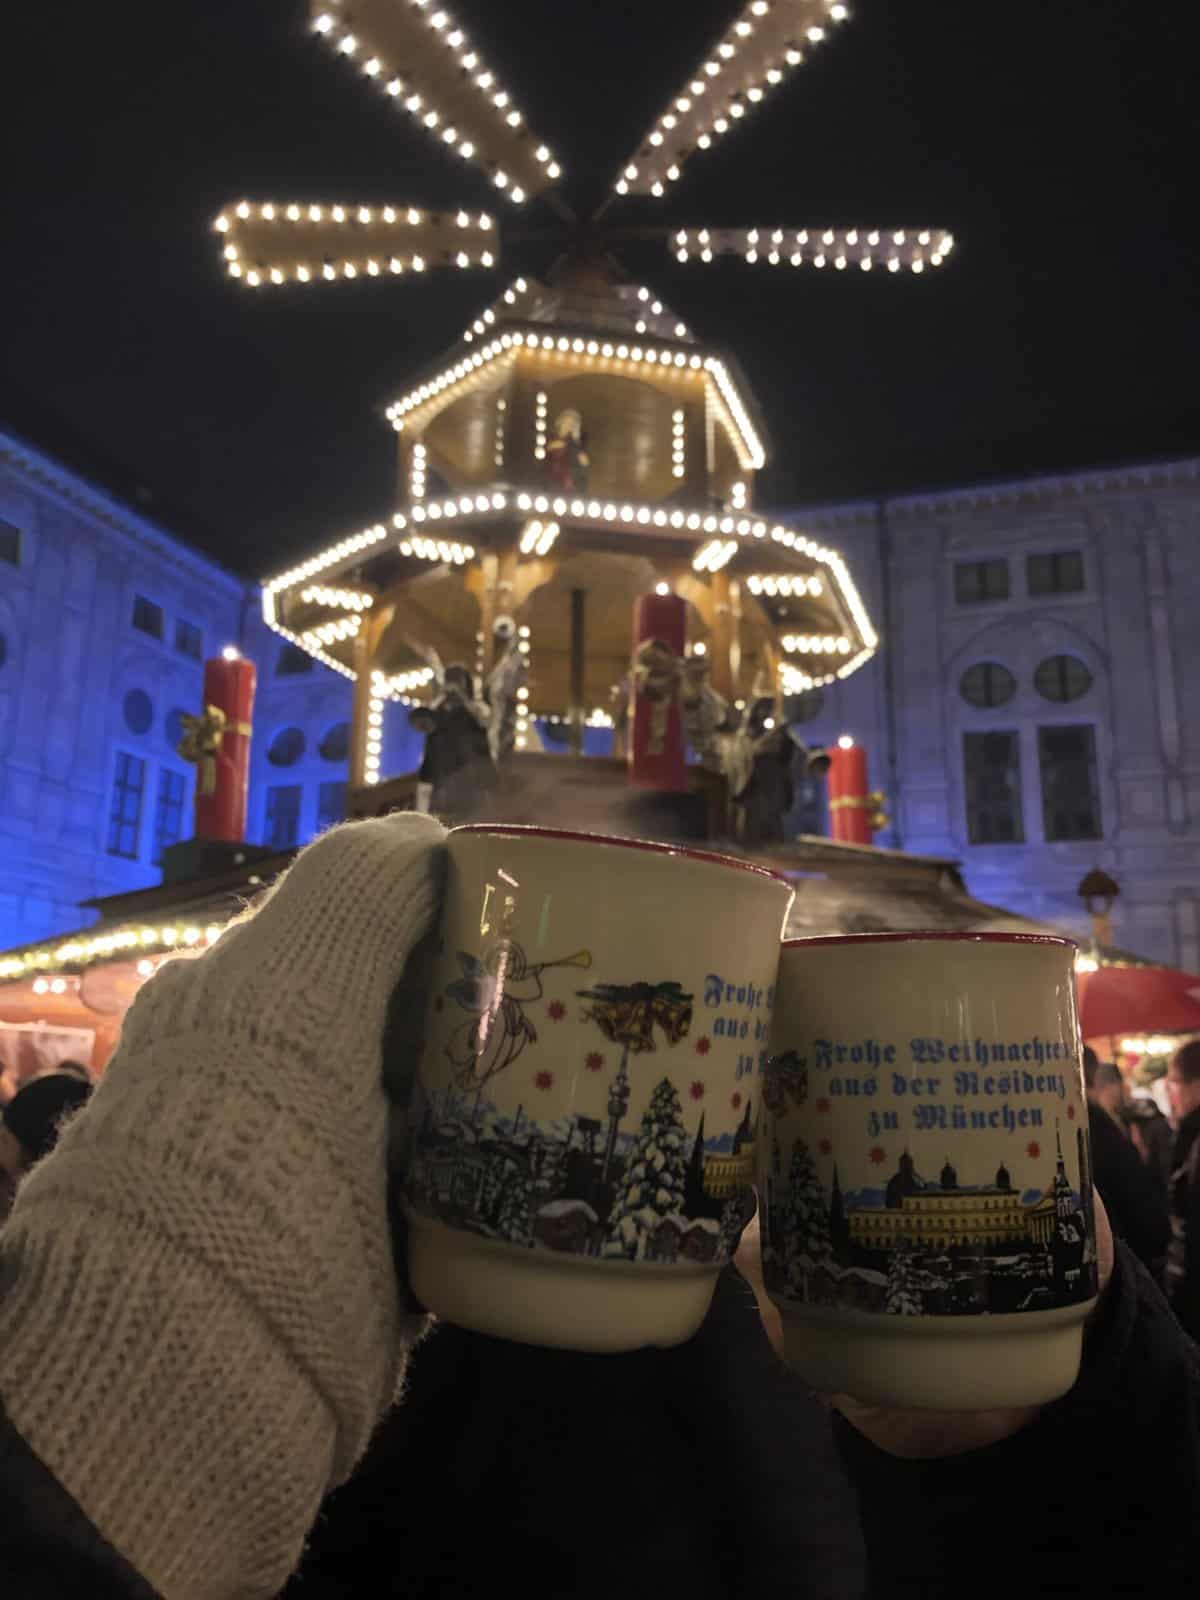 Gluhwein mugs in front of the Christmas Pyramid at the Christmas Market in Munich